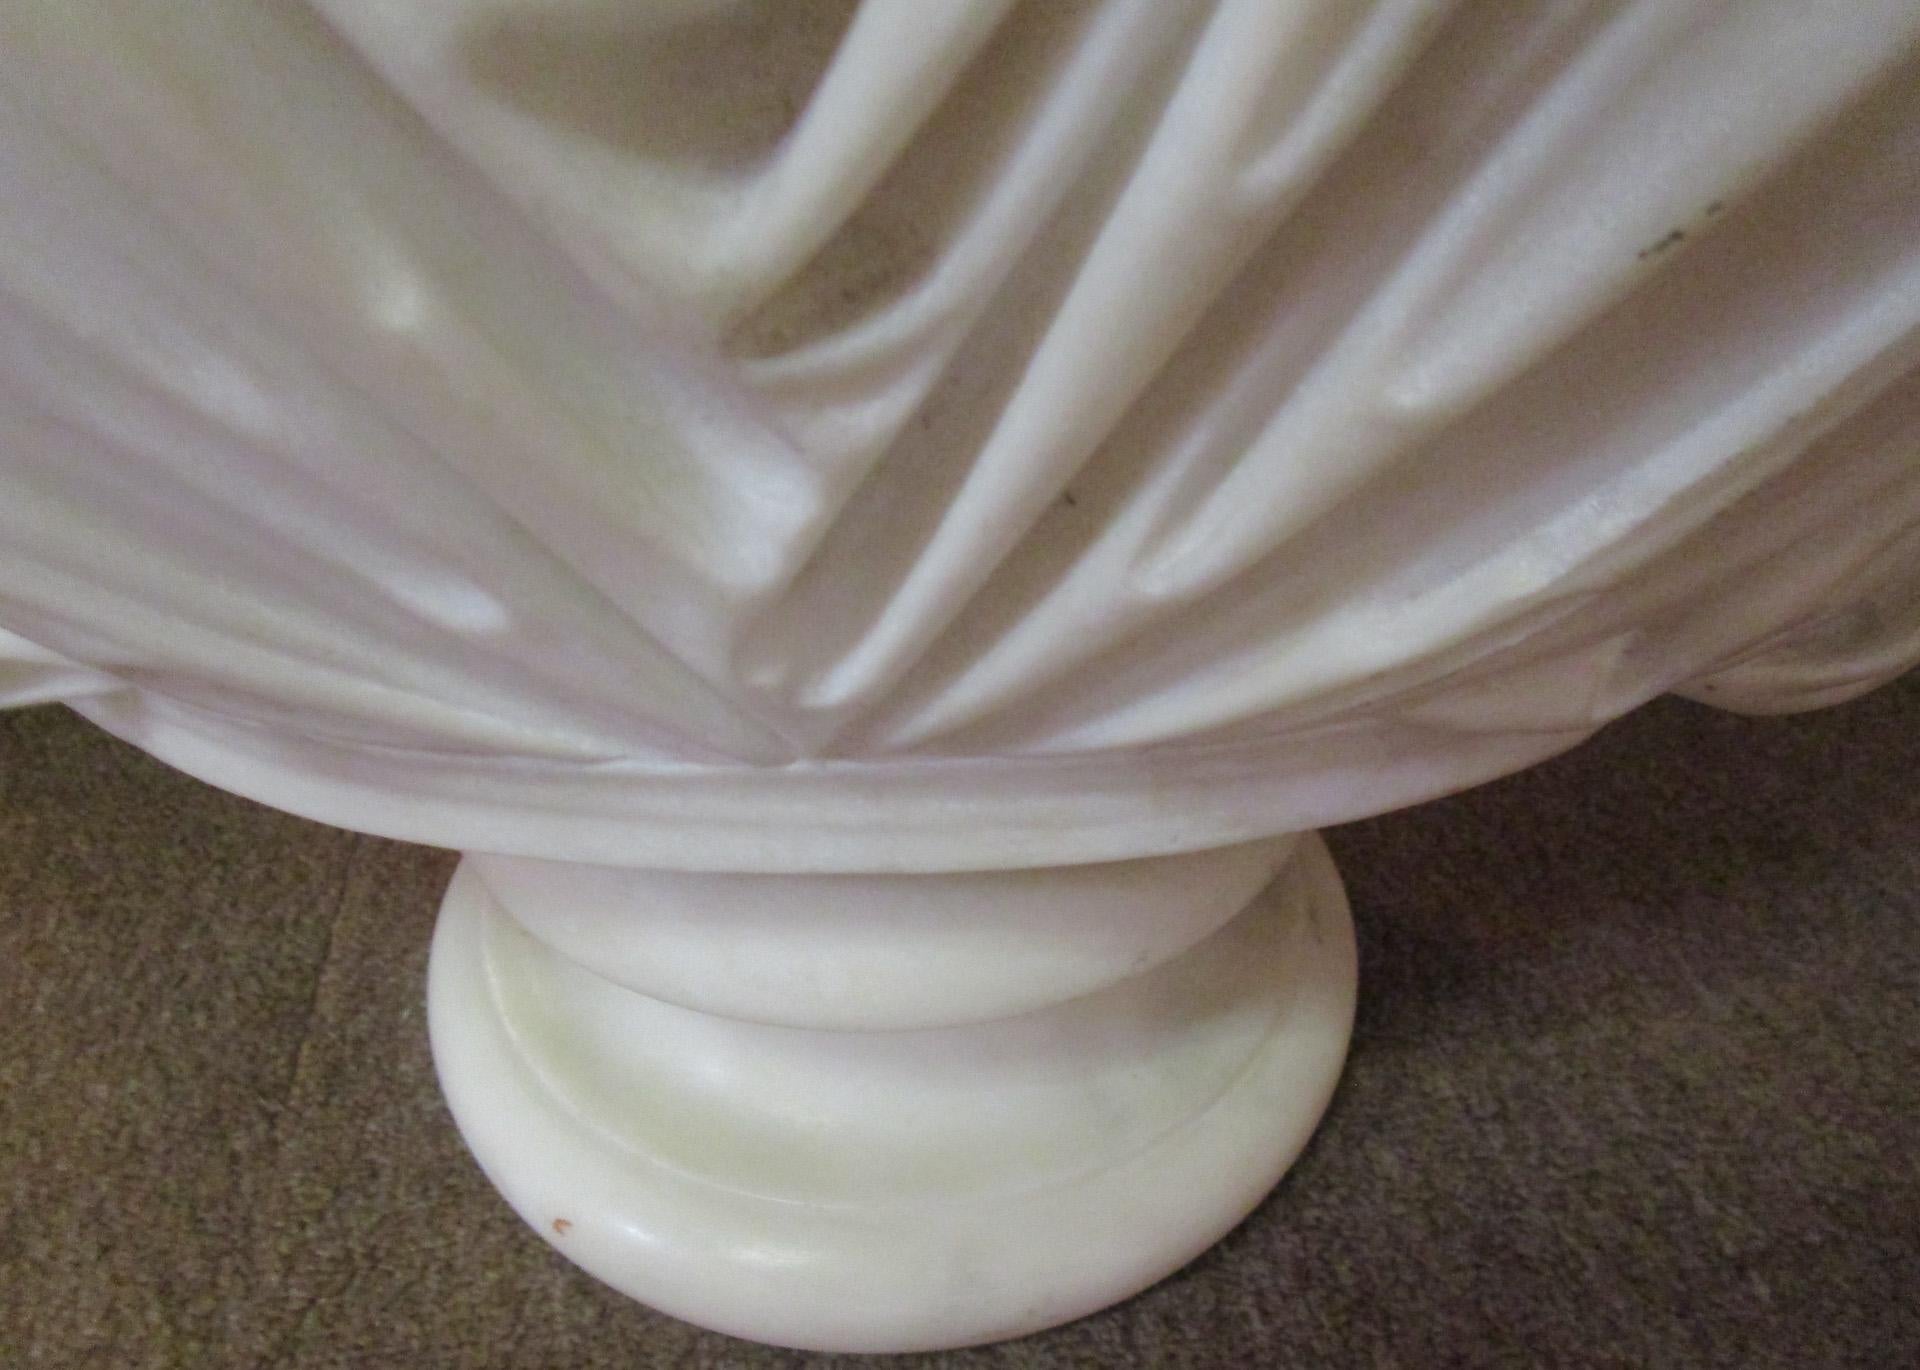 Mid-19th Century Italian Neoclassic Marble Bust of Woman signed Lawrence Macdonald Rome 1852 For Sale